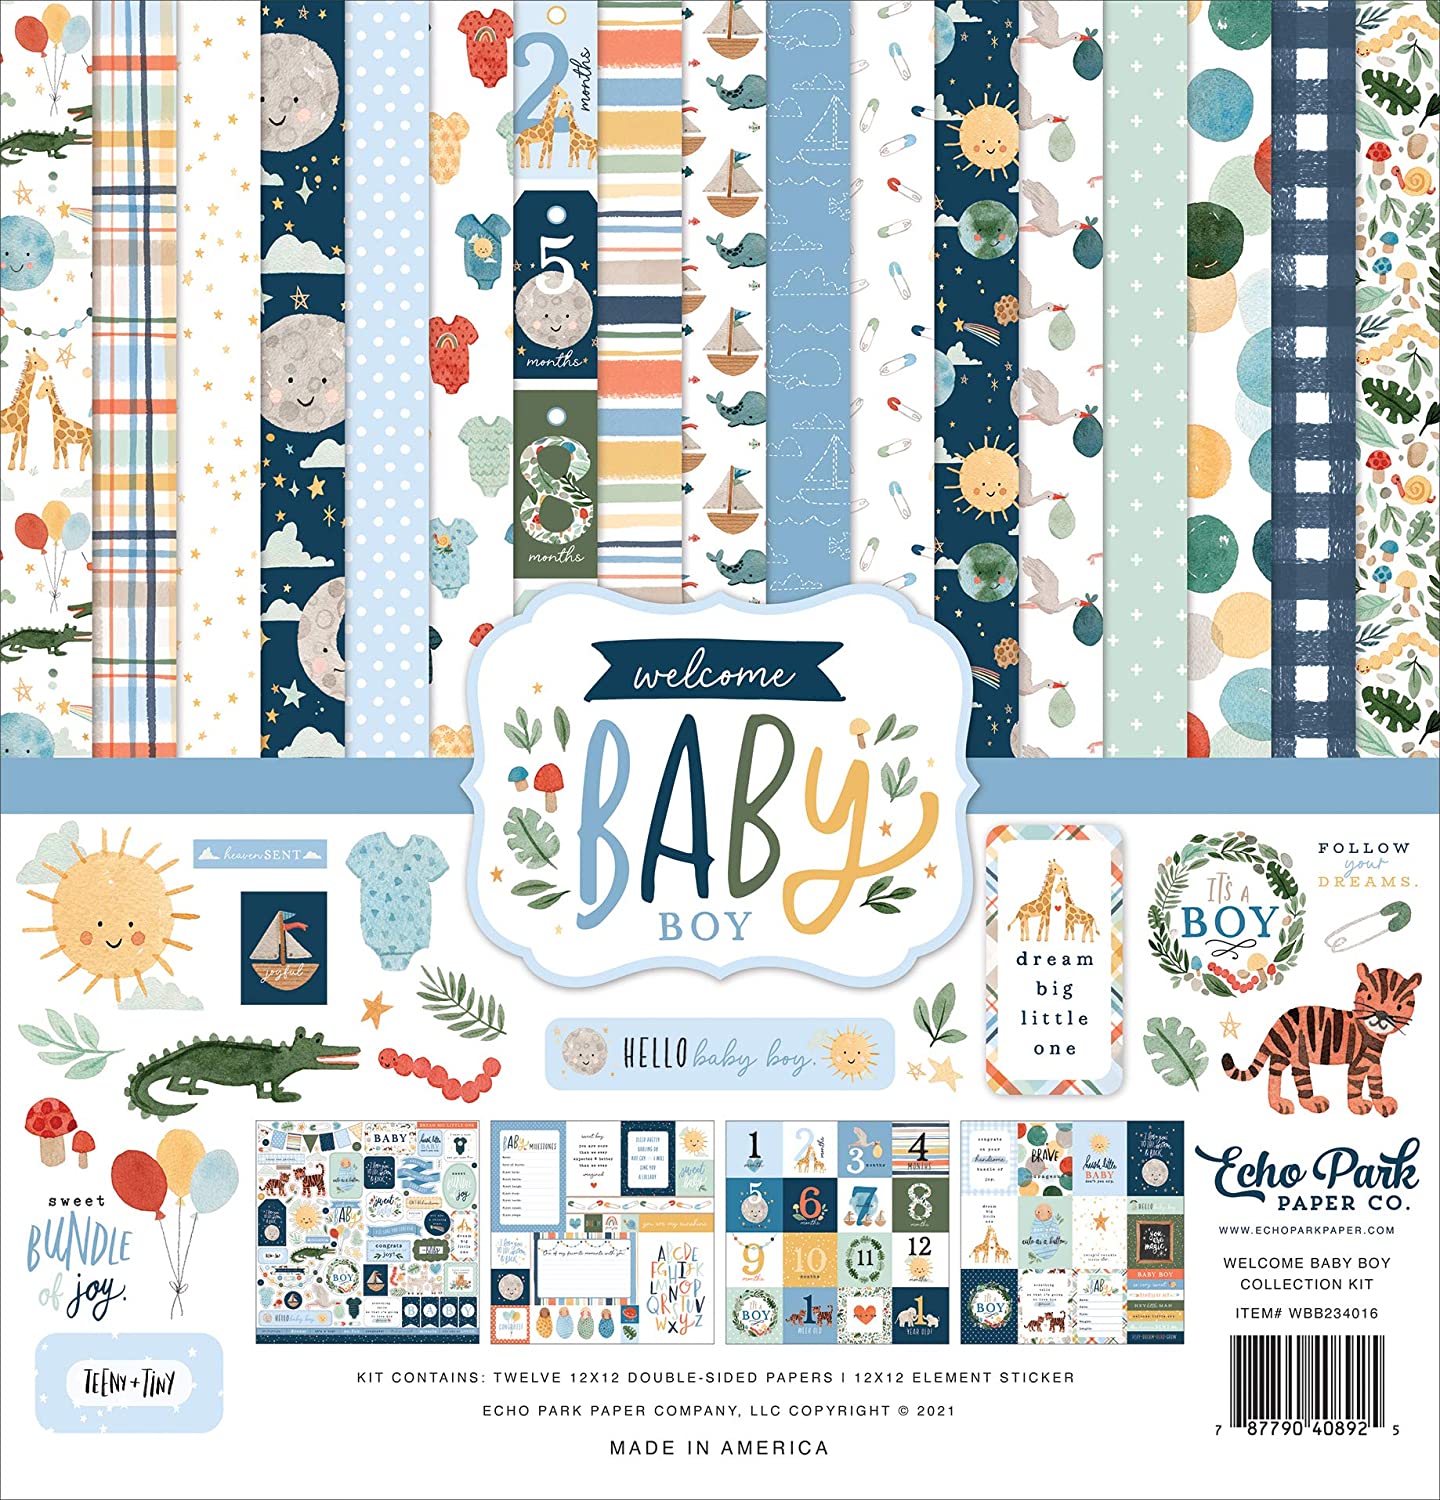 Best Double Sided Paper Collection- Echo Park Paper Company Welcome Baby Boy Collection Kit Paper